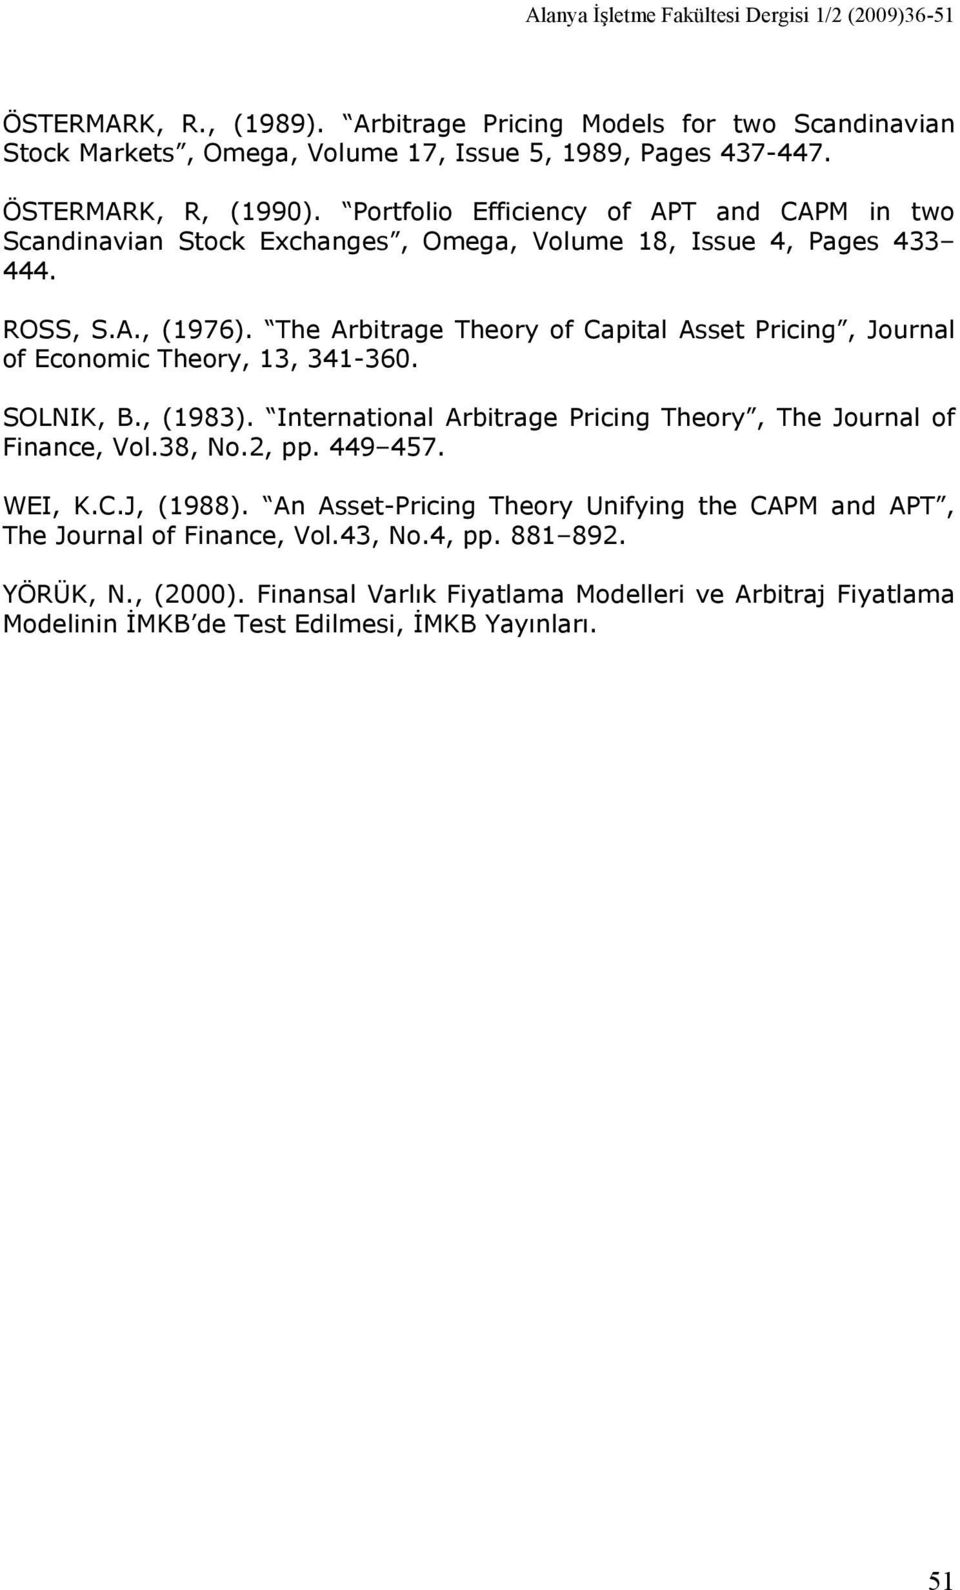 The Arbitrage Theory of Capital Asset Pricing, Journal of Economic Theory, 13, 341-360. SOLNIK, B., (1983). International Arbitrage Pricing Theory, The Journal of Finance, Vol.38, No.2, pp.